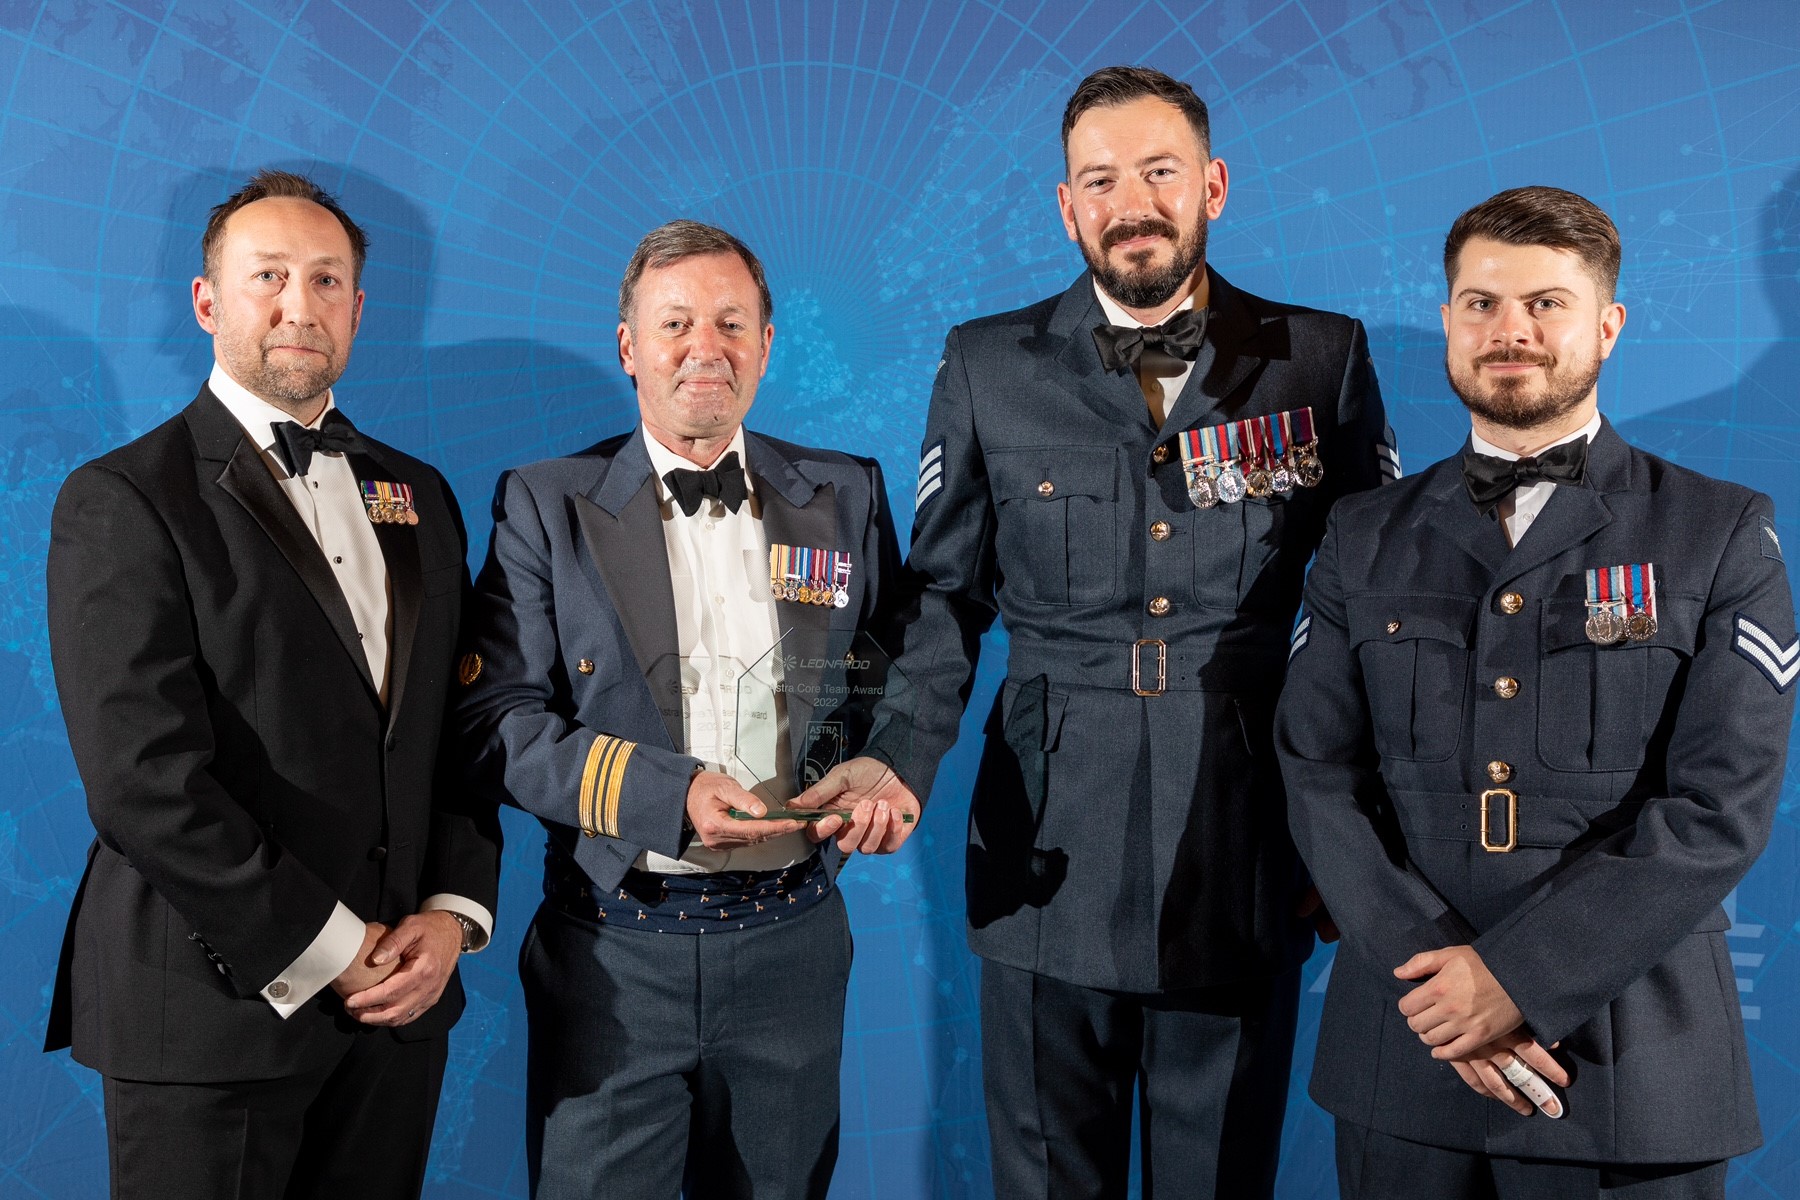 Image shows RAF aviator holding award for picture.